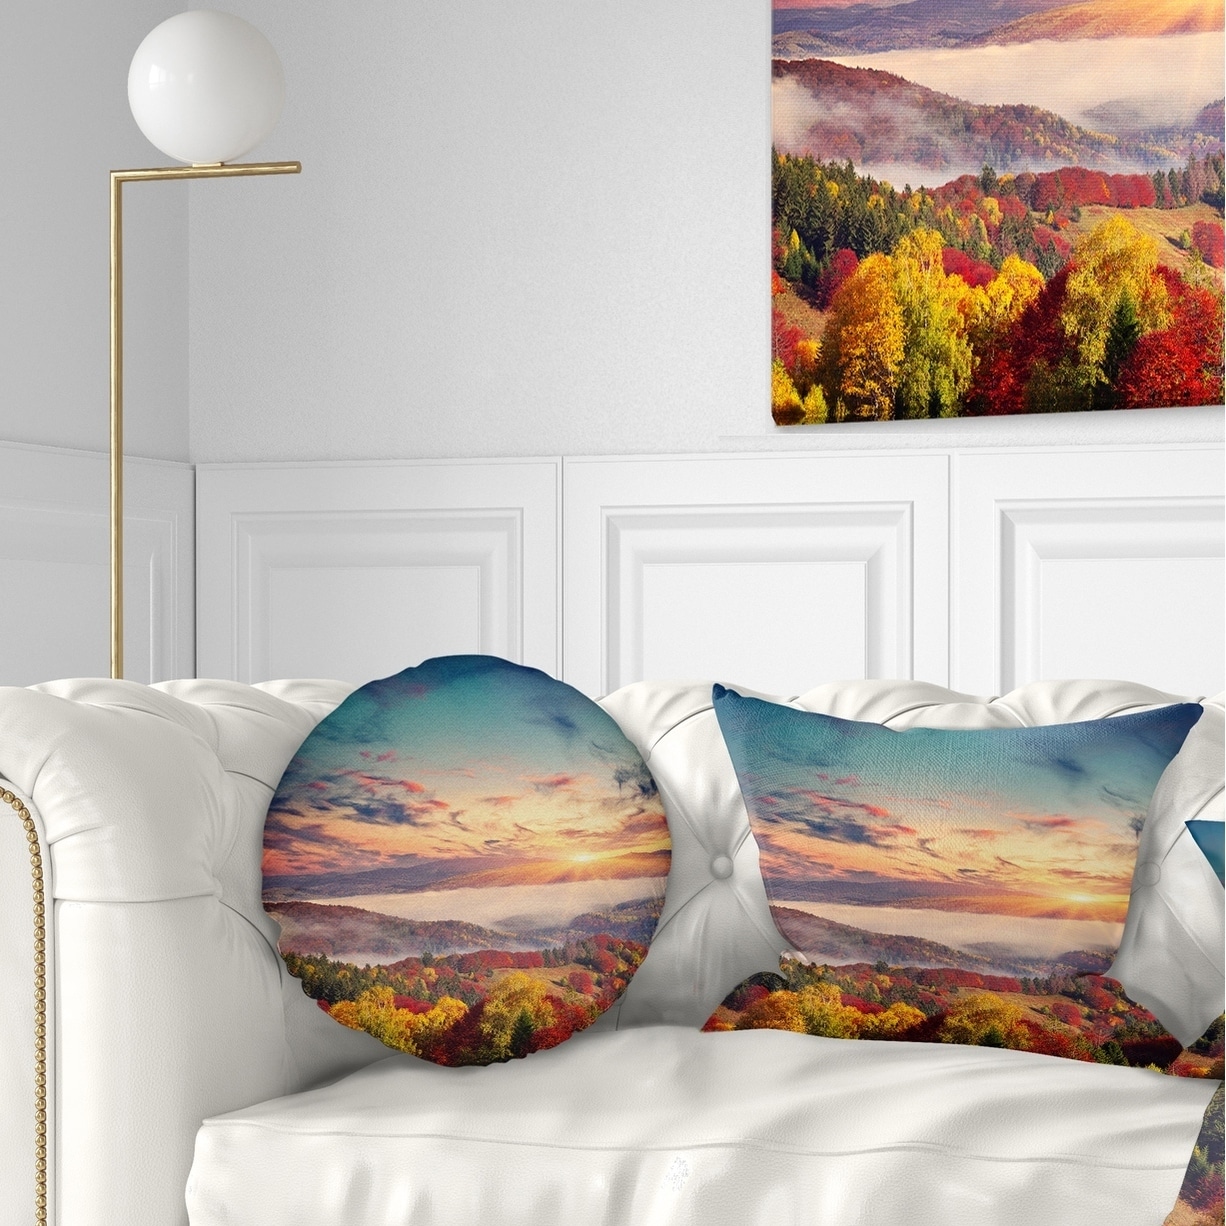 https://ak1.ostkcdn.com/images/products/20952570/Designart-Colorful-Sunset-in-Foggy-Mountains-Landscape-Printed-Throw-Pillow-5d184d0b-ef5f-4249-ad80-03015e747851.jpg